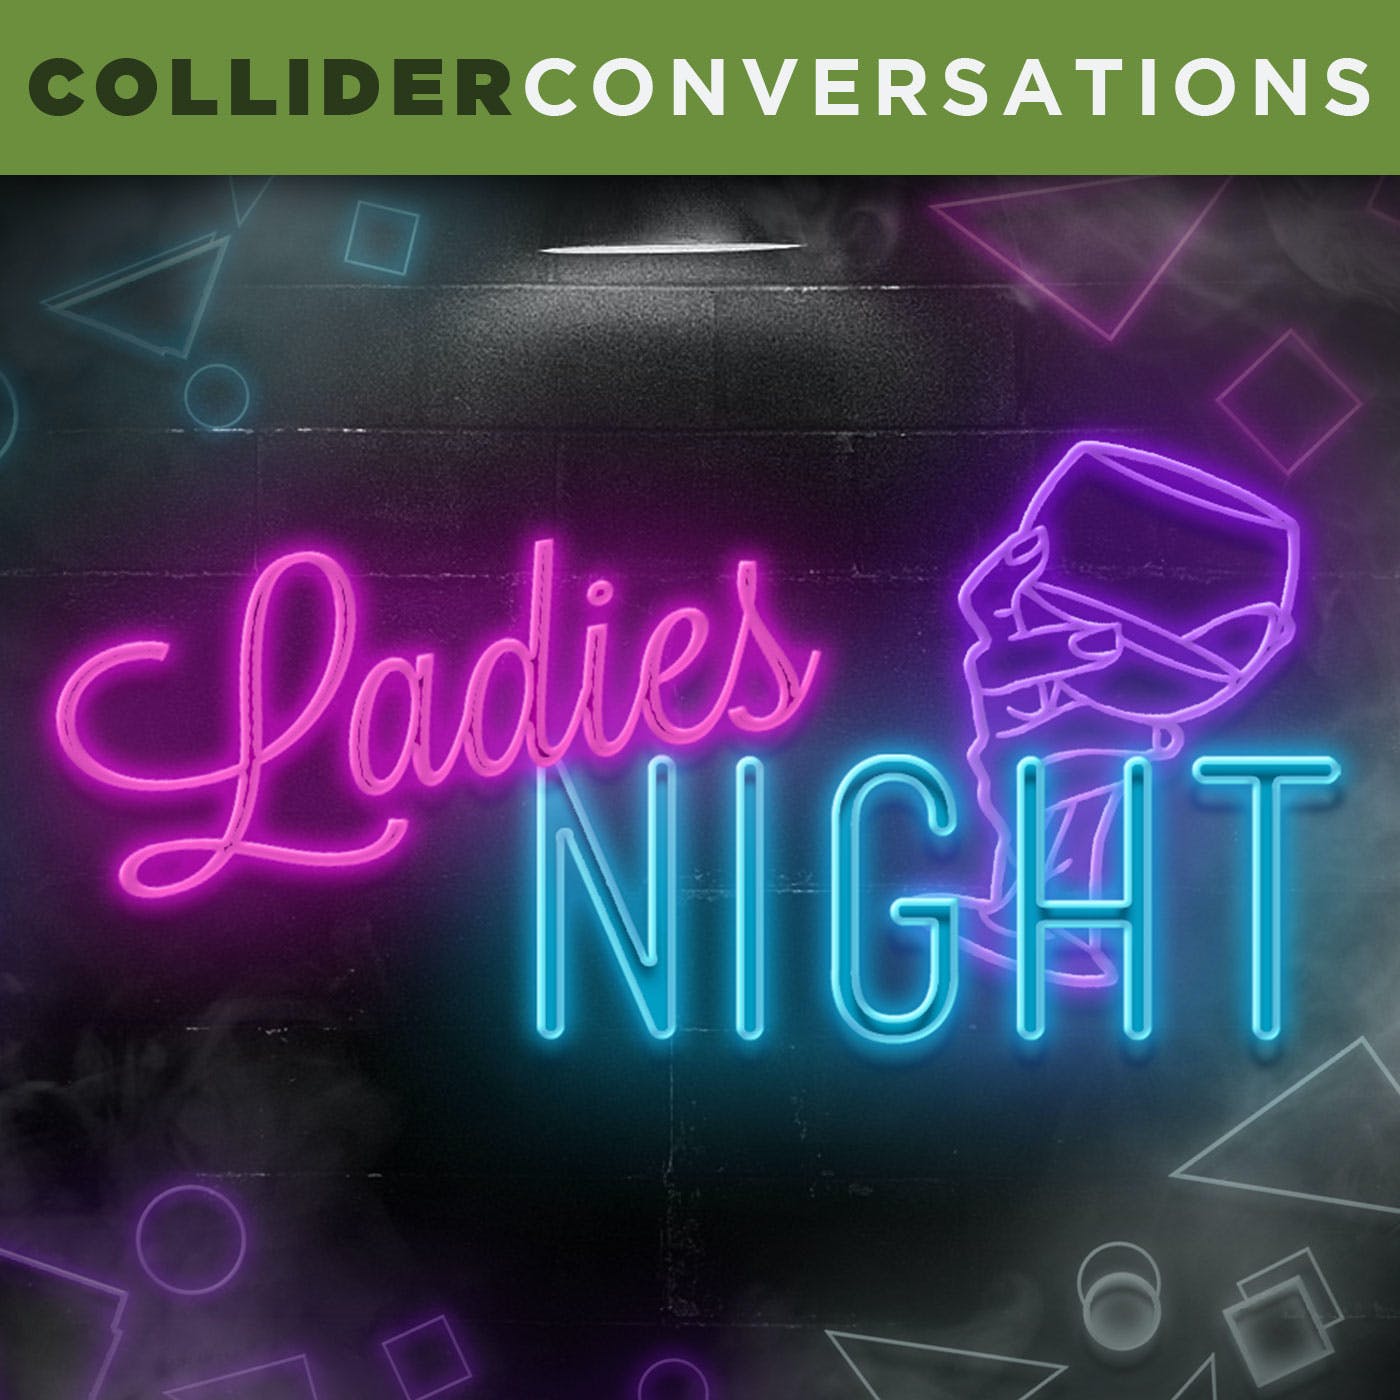 Collider Ladies Night - Alicia Silverstone on Clueless, The Wonder Years, Bad Therapy and More